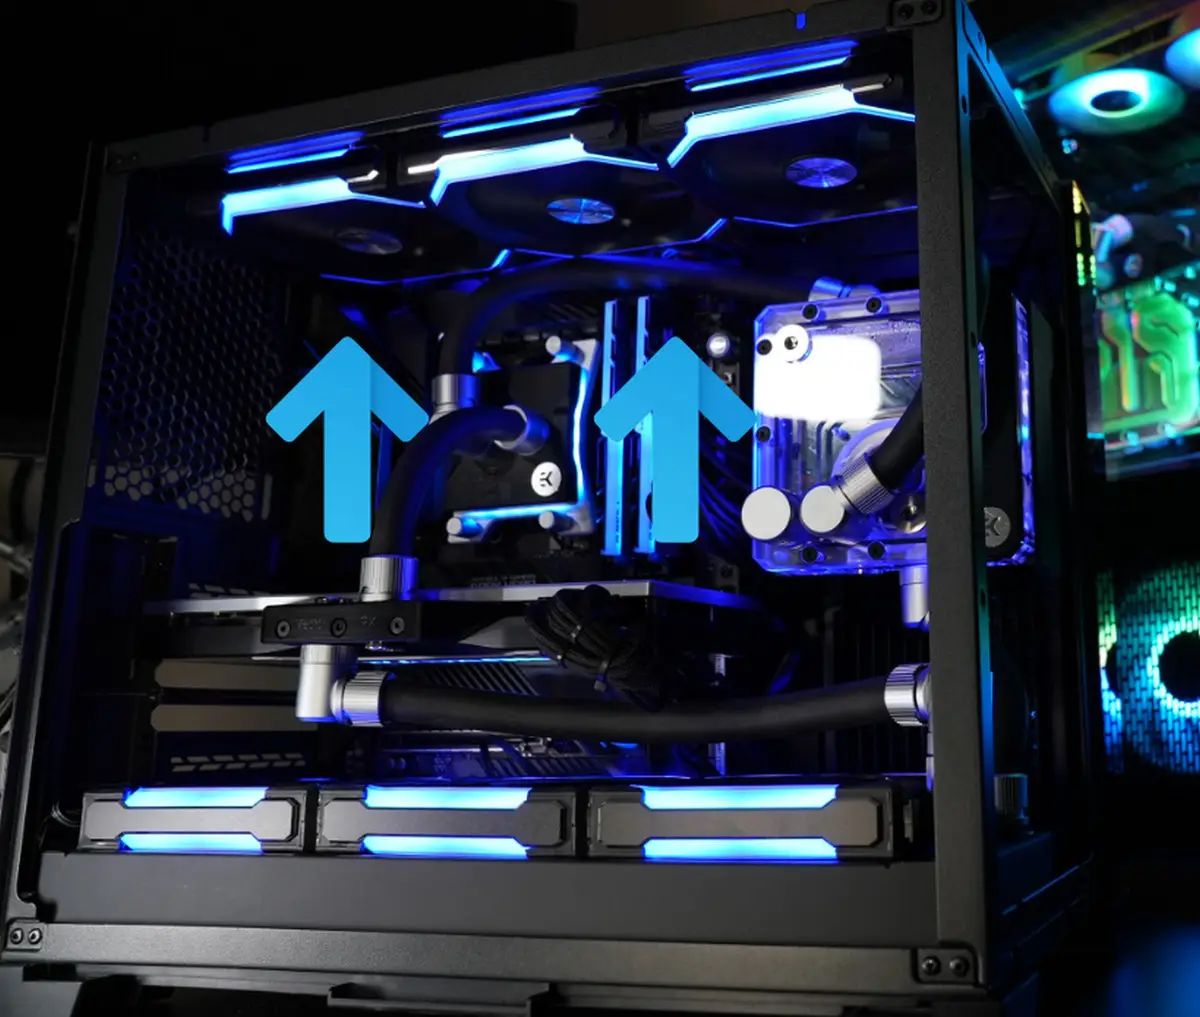 What Does A Top Fan Radiator Do In A PC Case